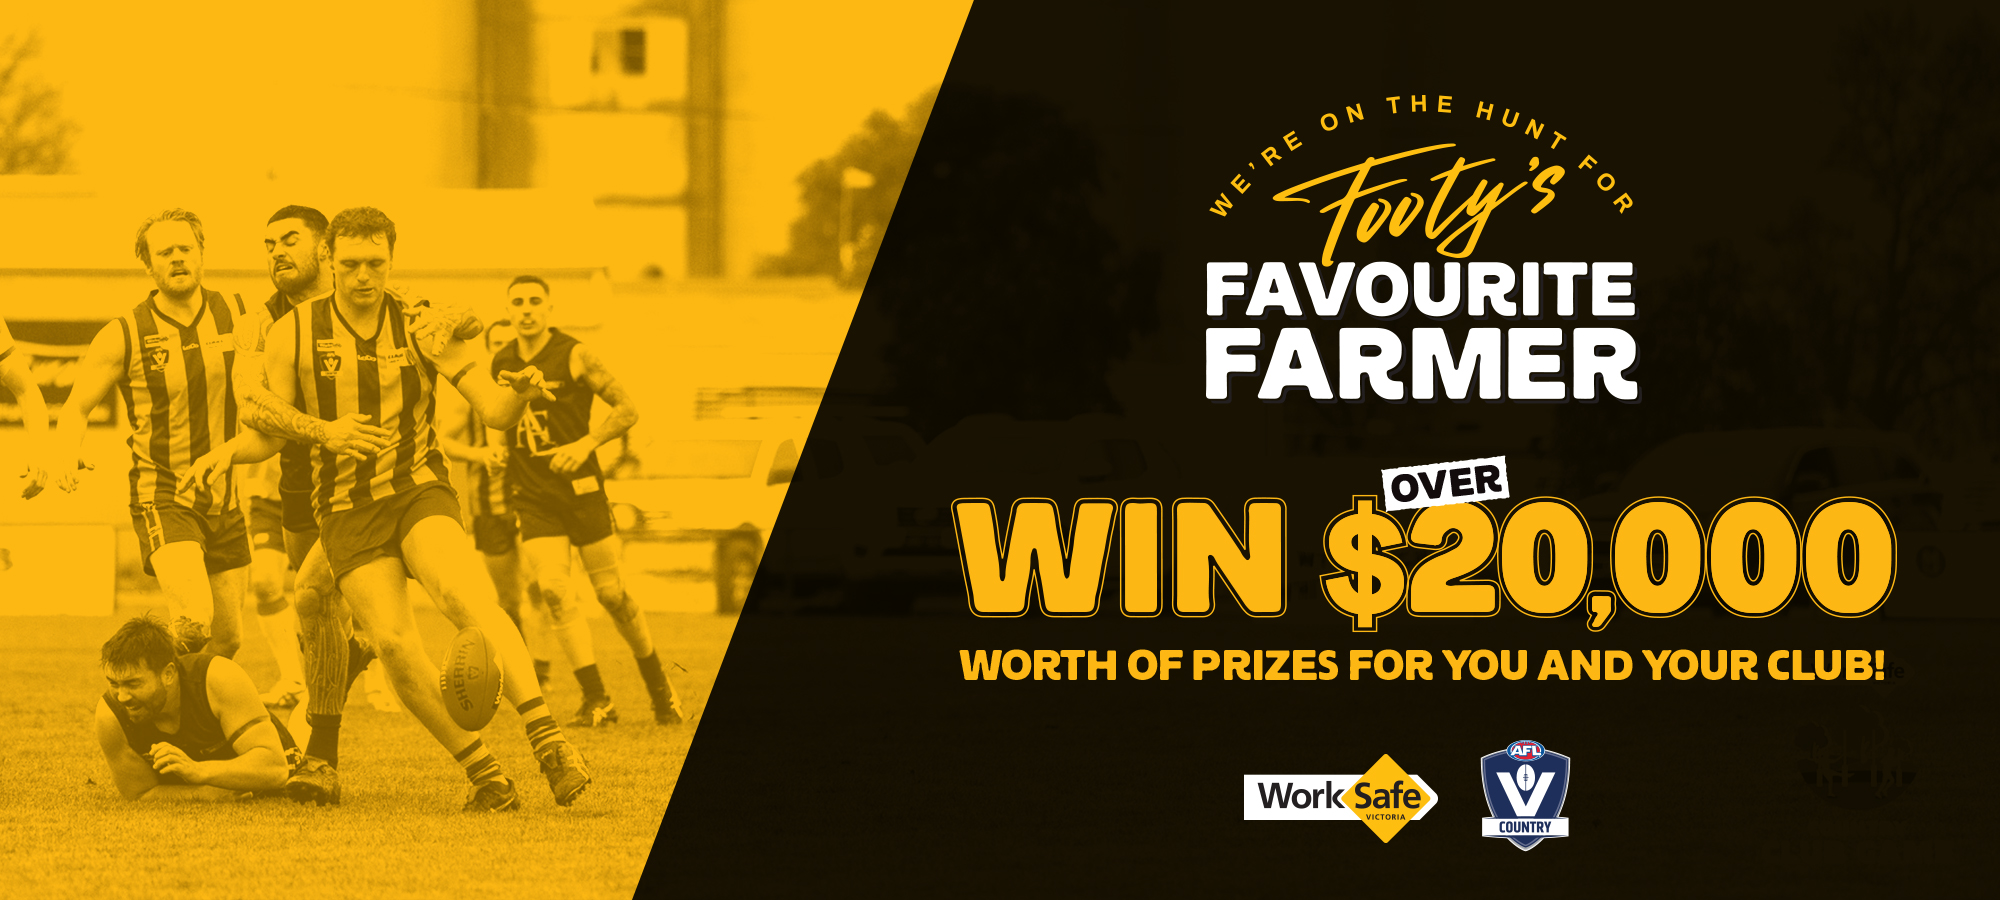 We're on the hunt for Footy's Favourite Farmer